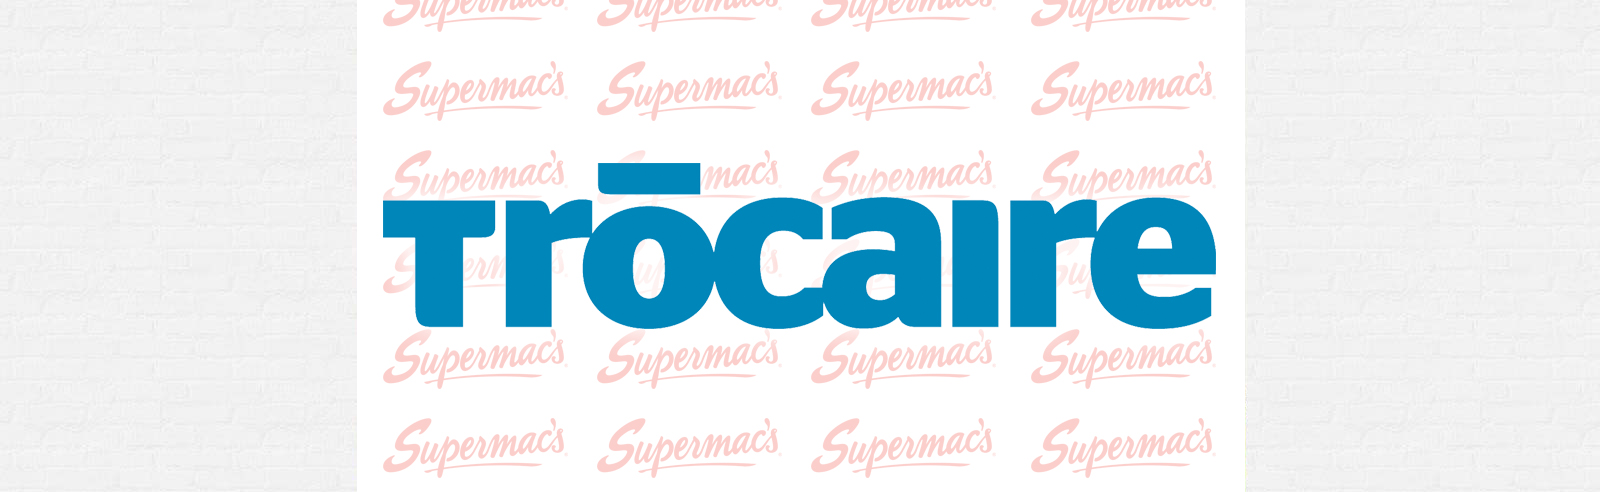 Over €40,000 Raised By Supermac’s In Aid of Trócaire In 2016